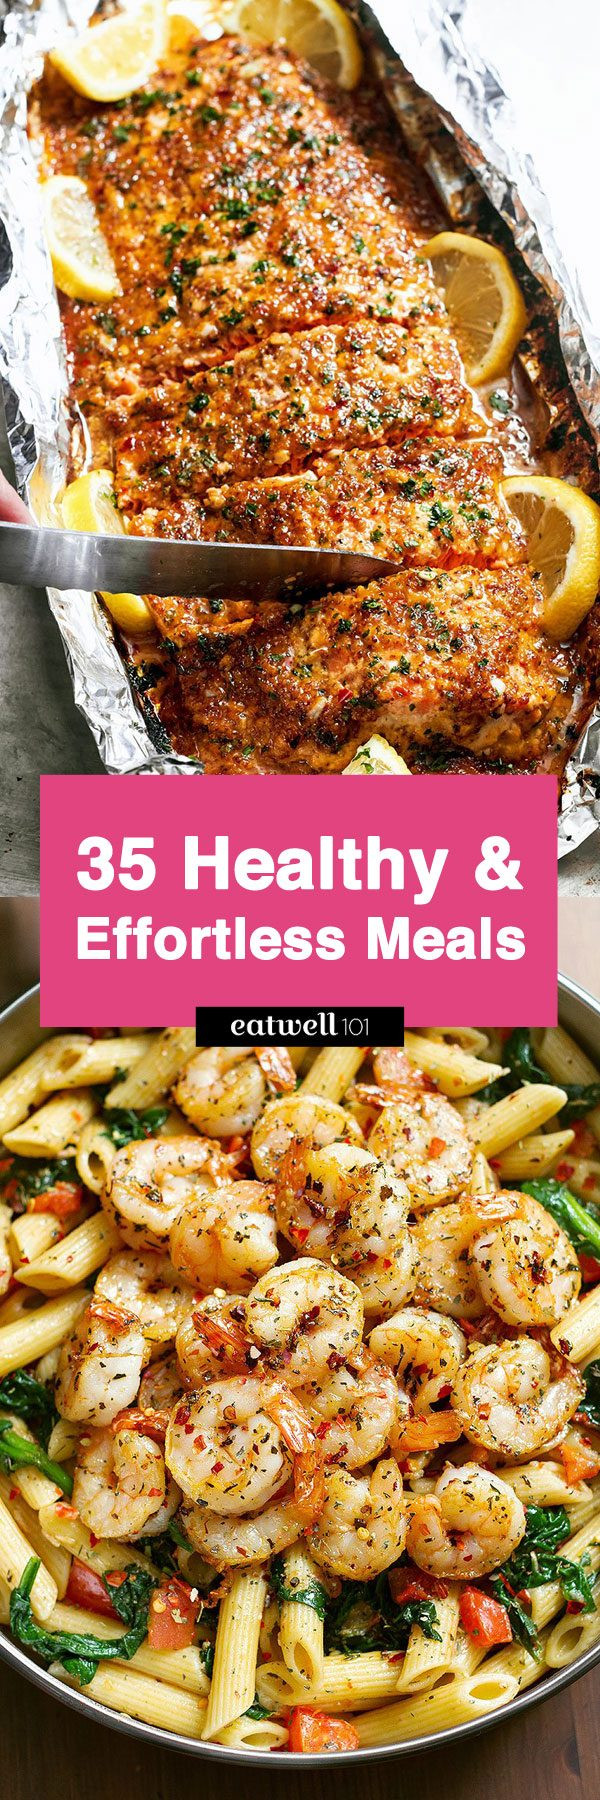 Healthy And Easy Dinner Recipes
 43 Low Effort and Healthy Dinner Recipes — Eatwell101